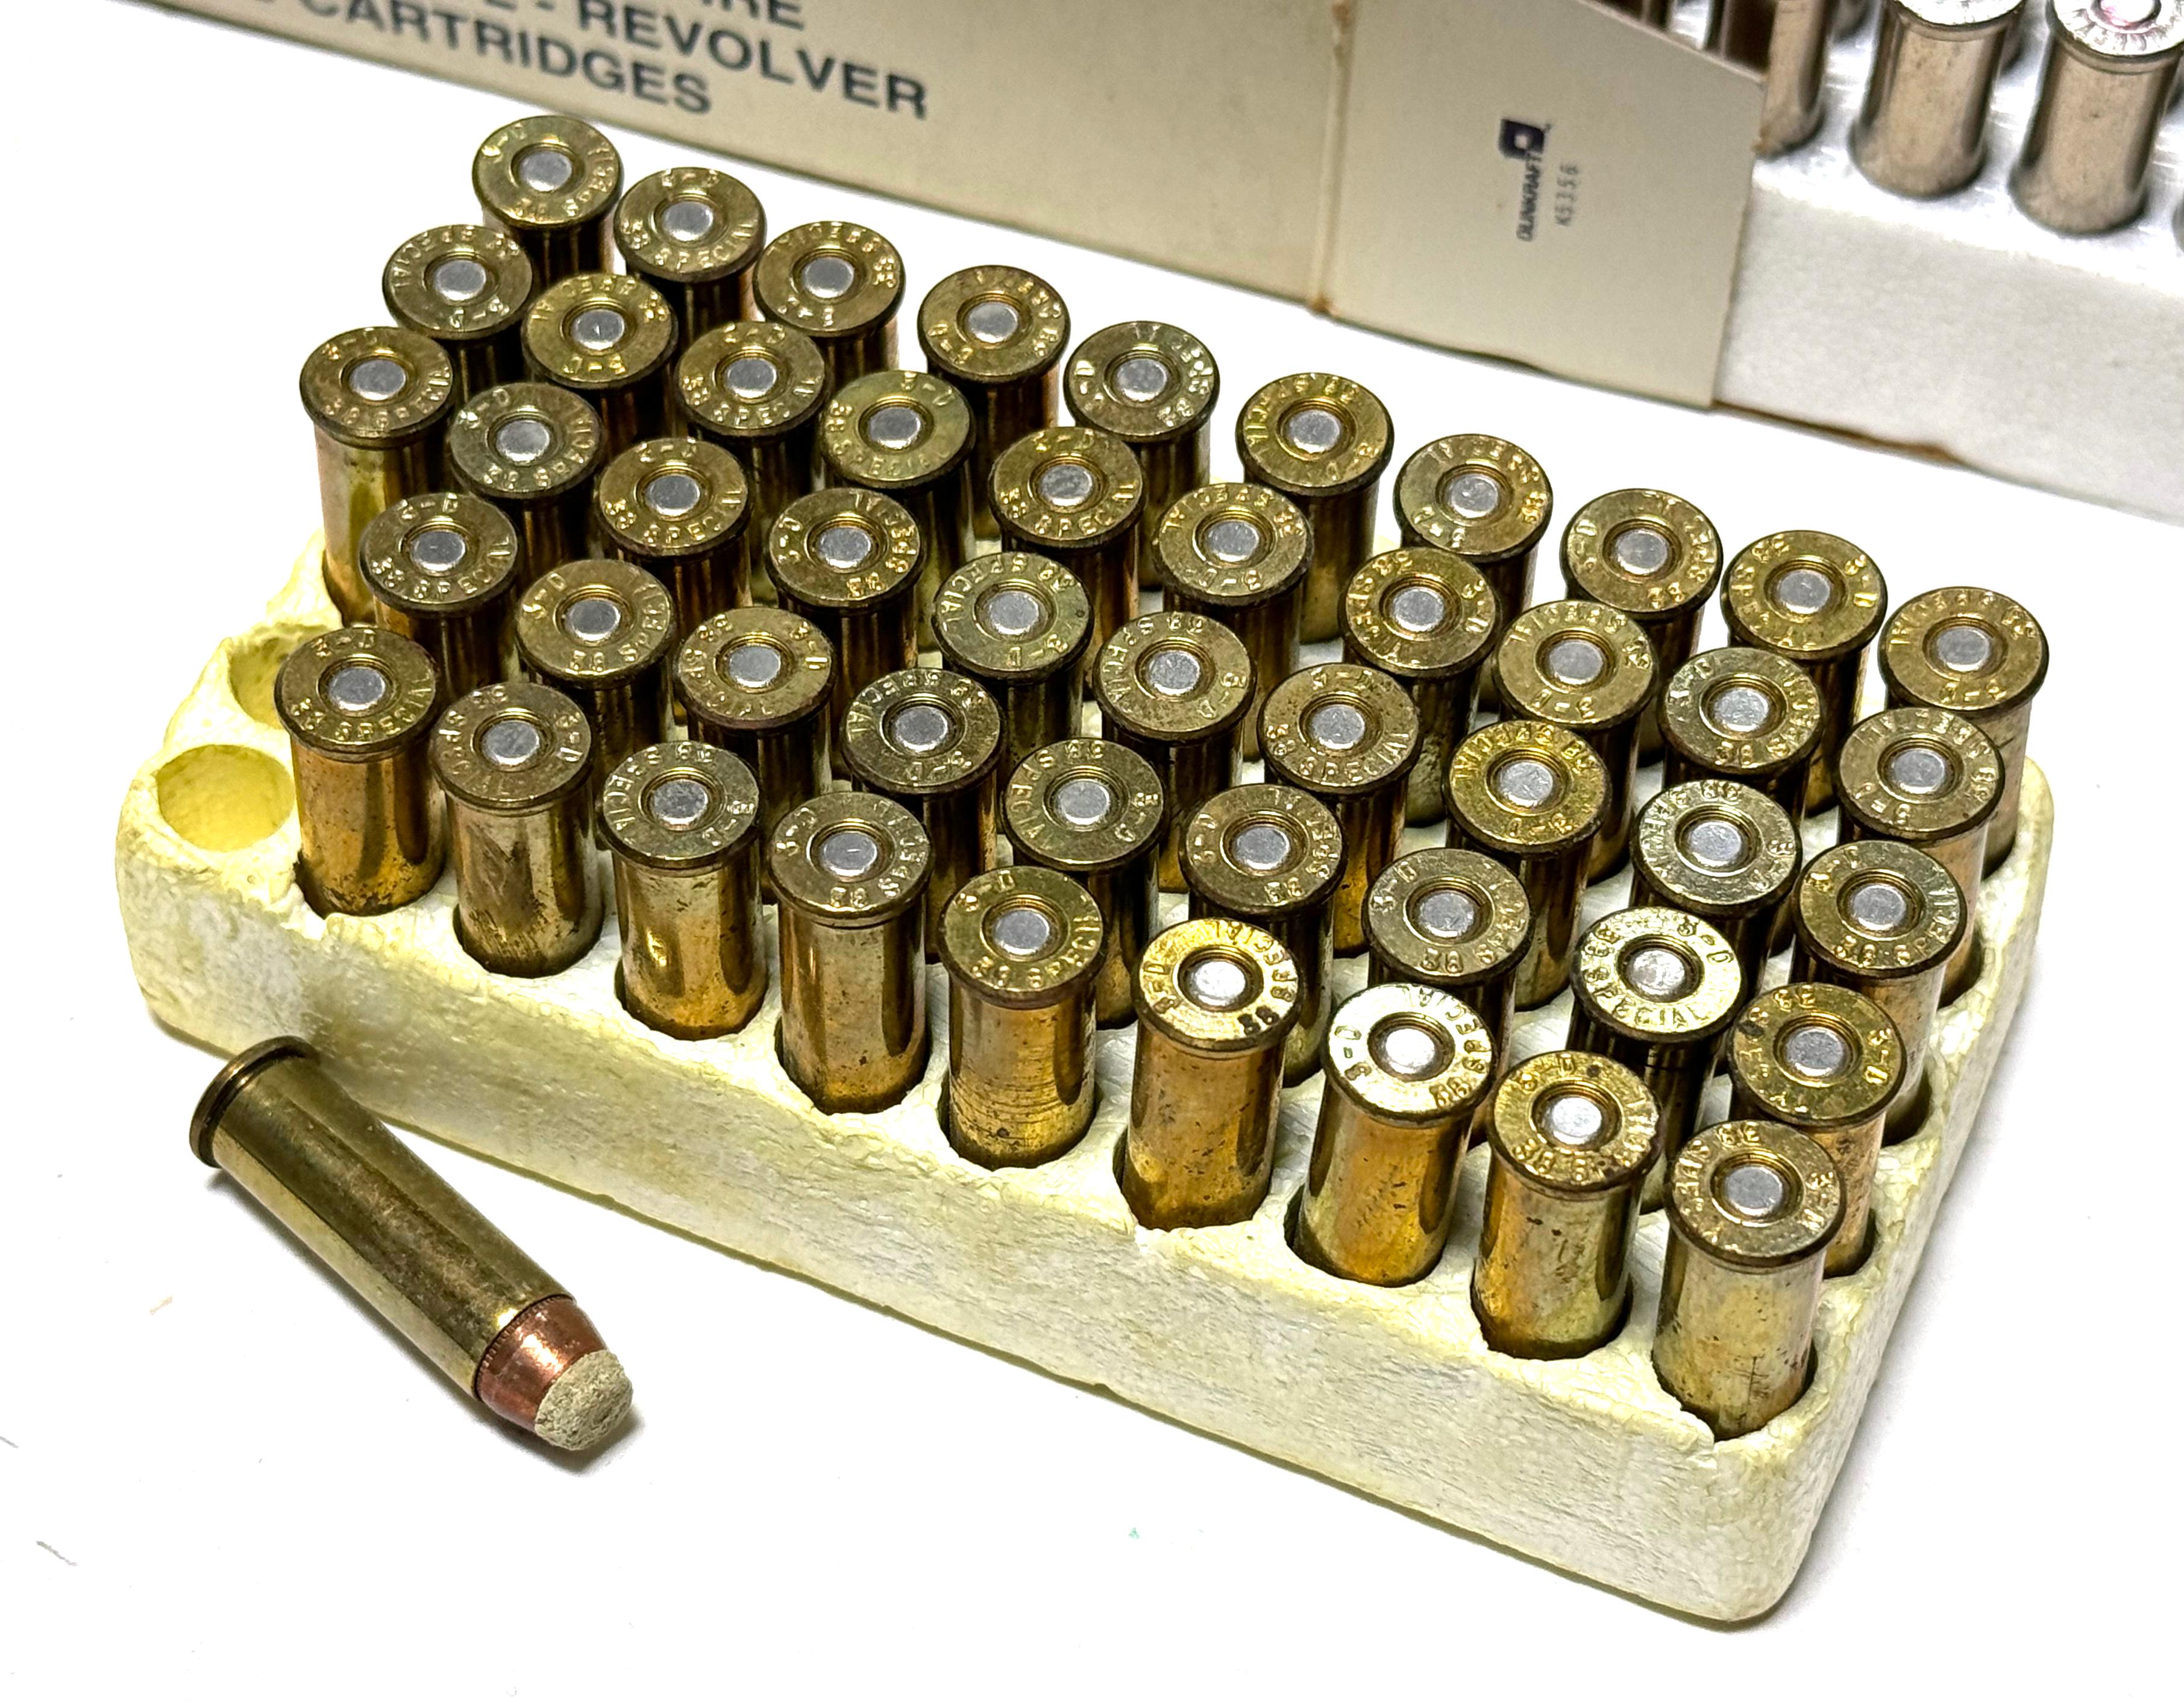 Factory 98rds. of .38 SPECIAL Police & JHP Ammunition